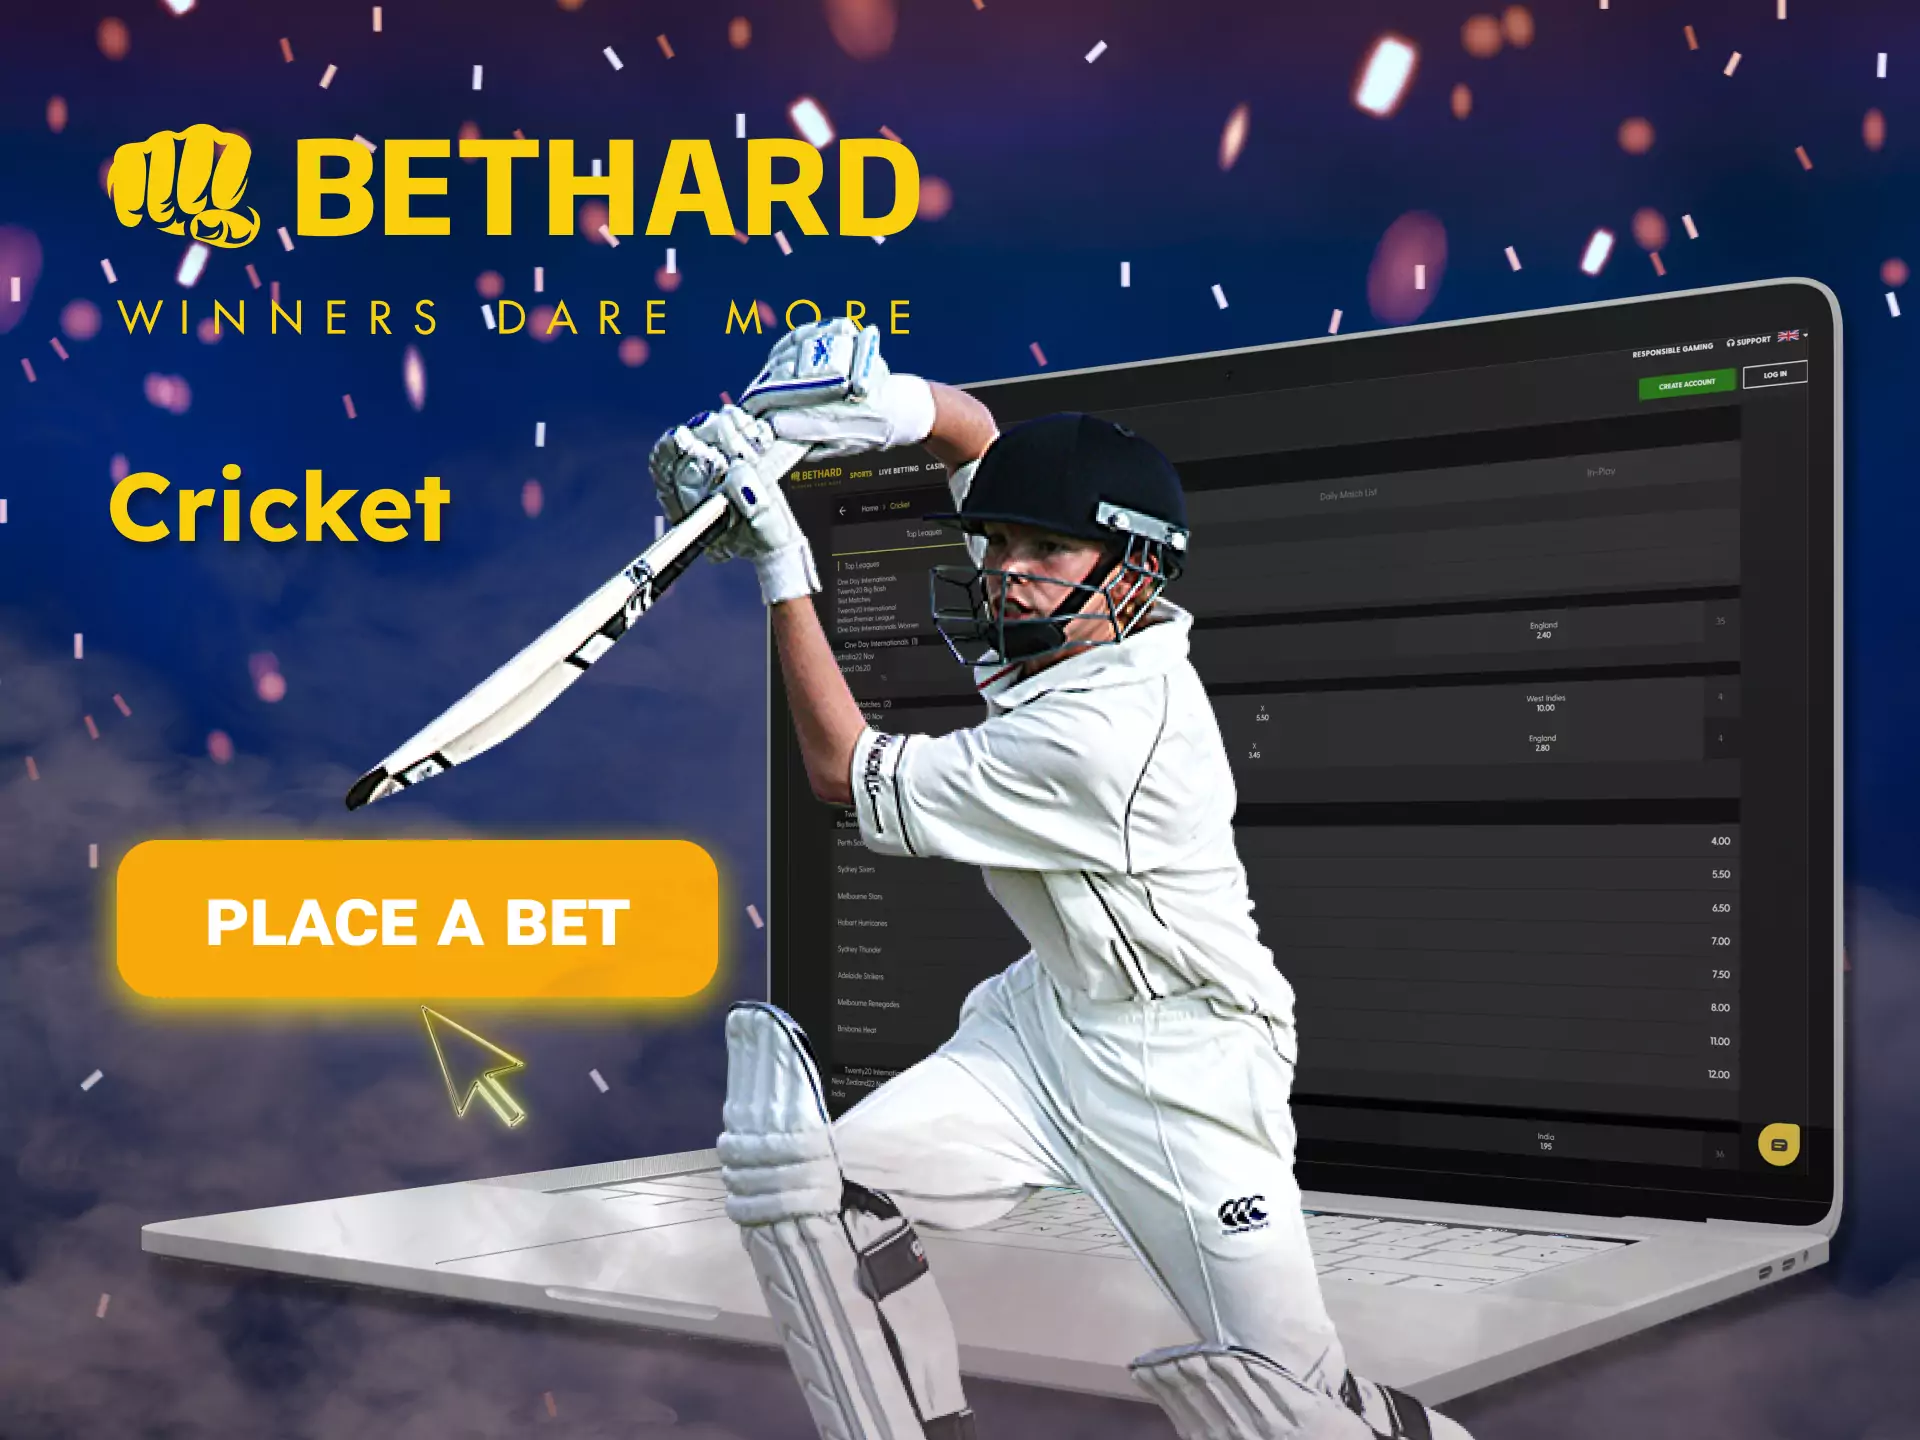 Place bets on cricket and have fun playing with Bethard.